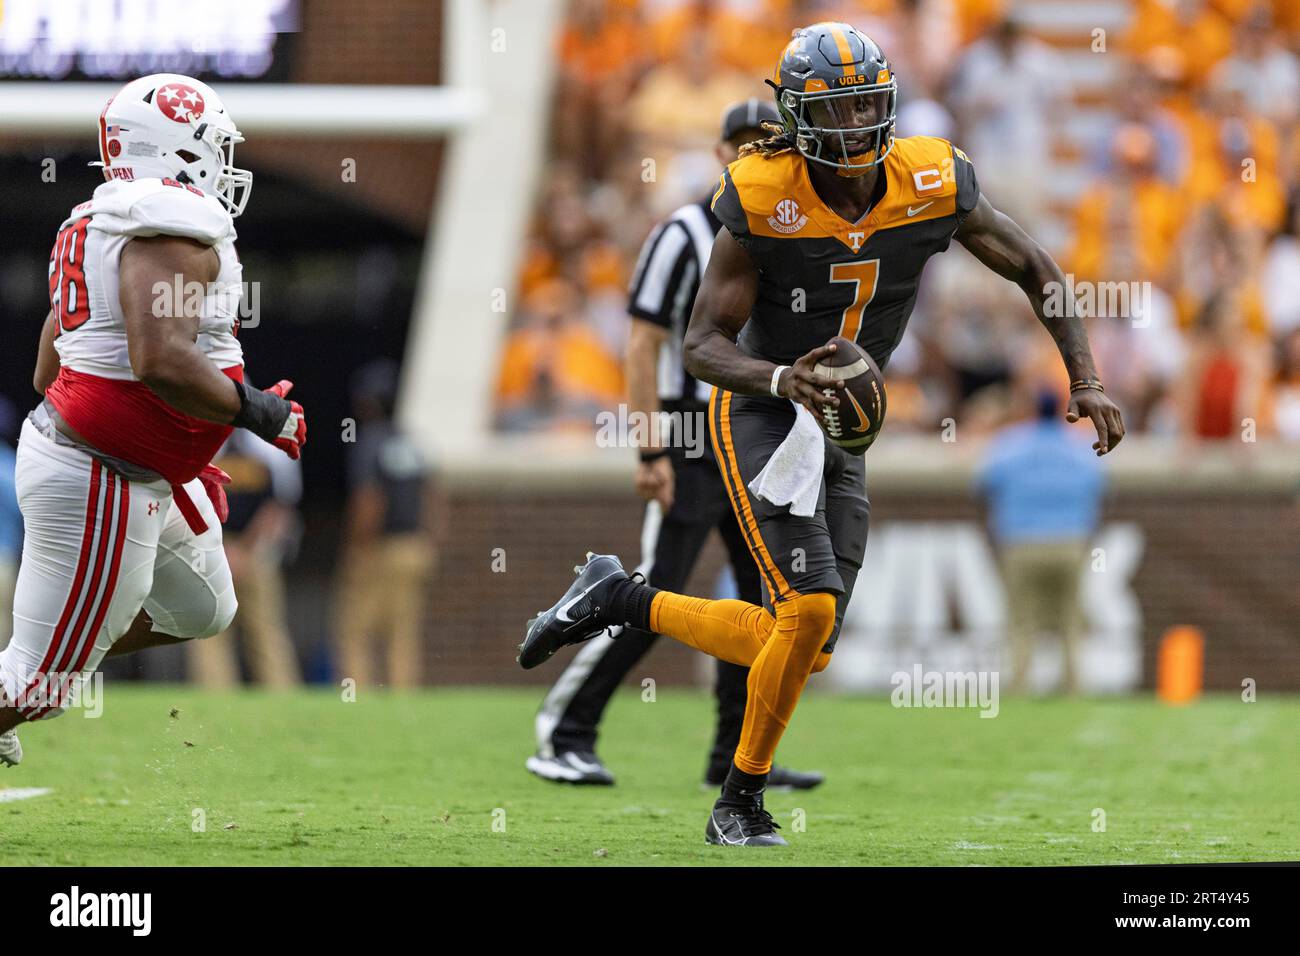 Tennessee quarterback Joe Milton III (7) runs for yardage as hes chased by Austin Peay defensive lineman Gardy Paul (28) during the first half of an NCAA college football game Saturday, Sept.